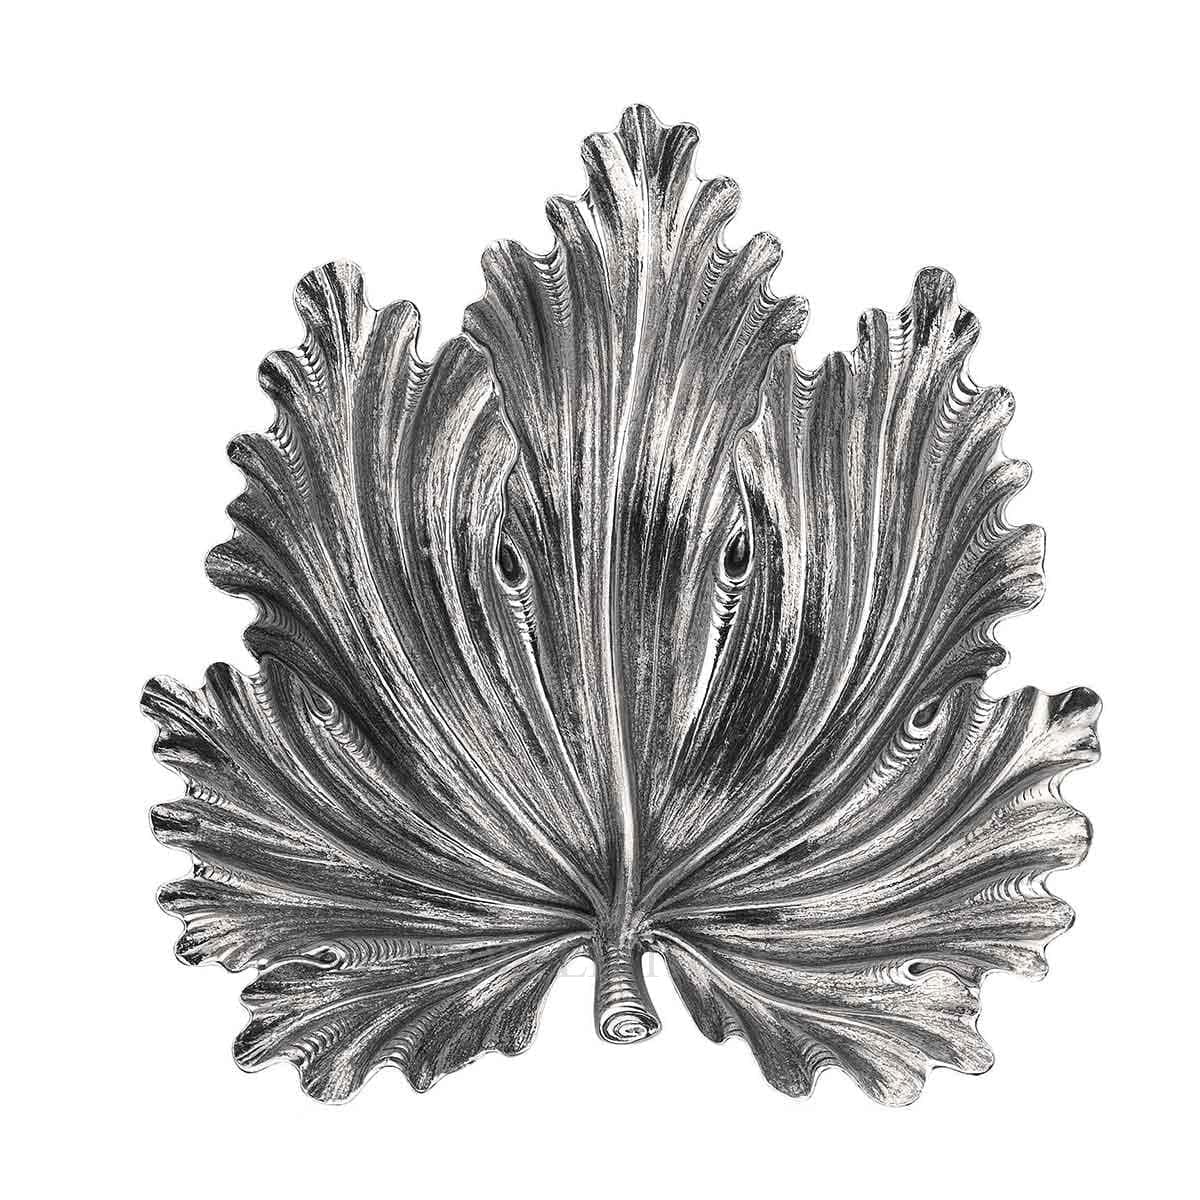 Buccellati Acanthus Sterling Silver Dish Small